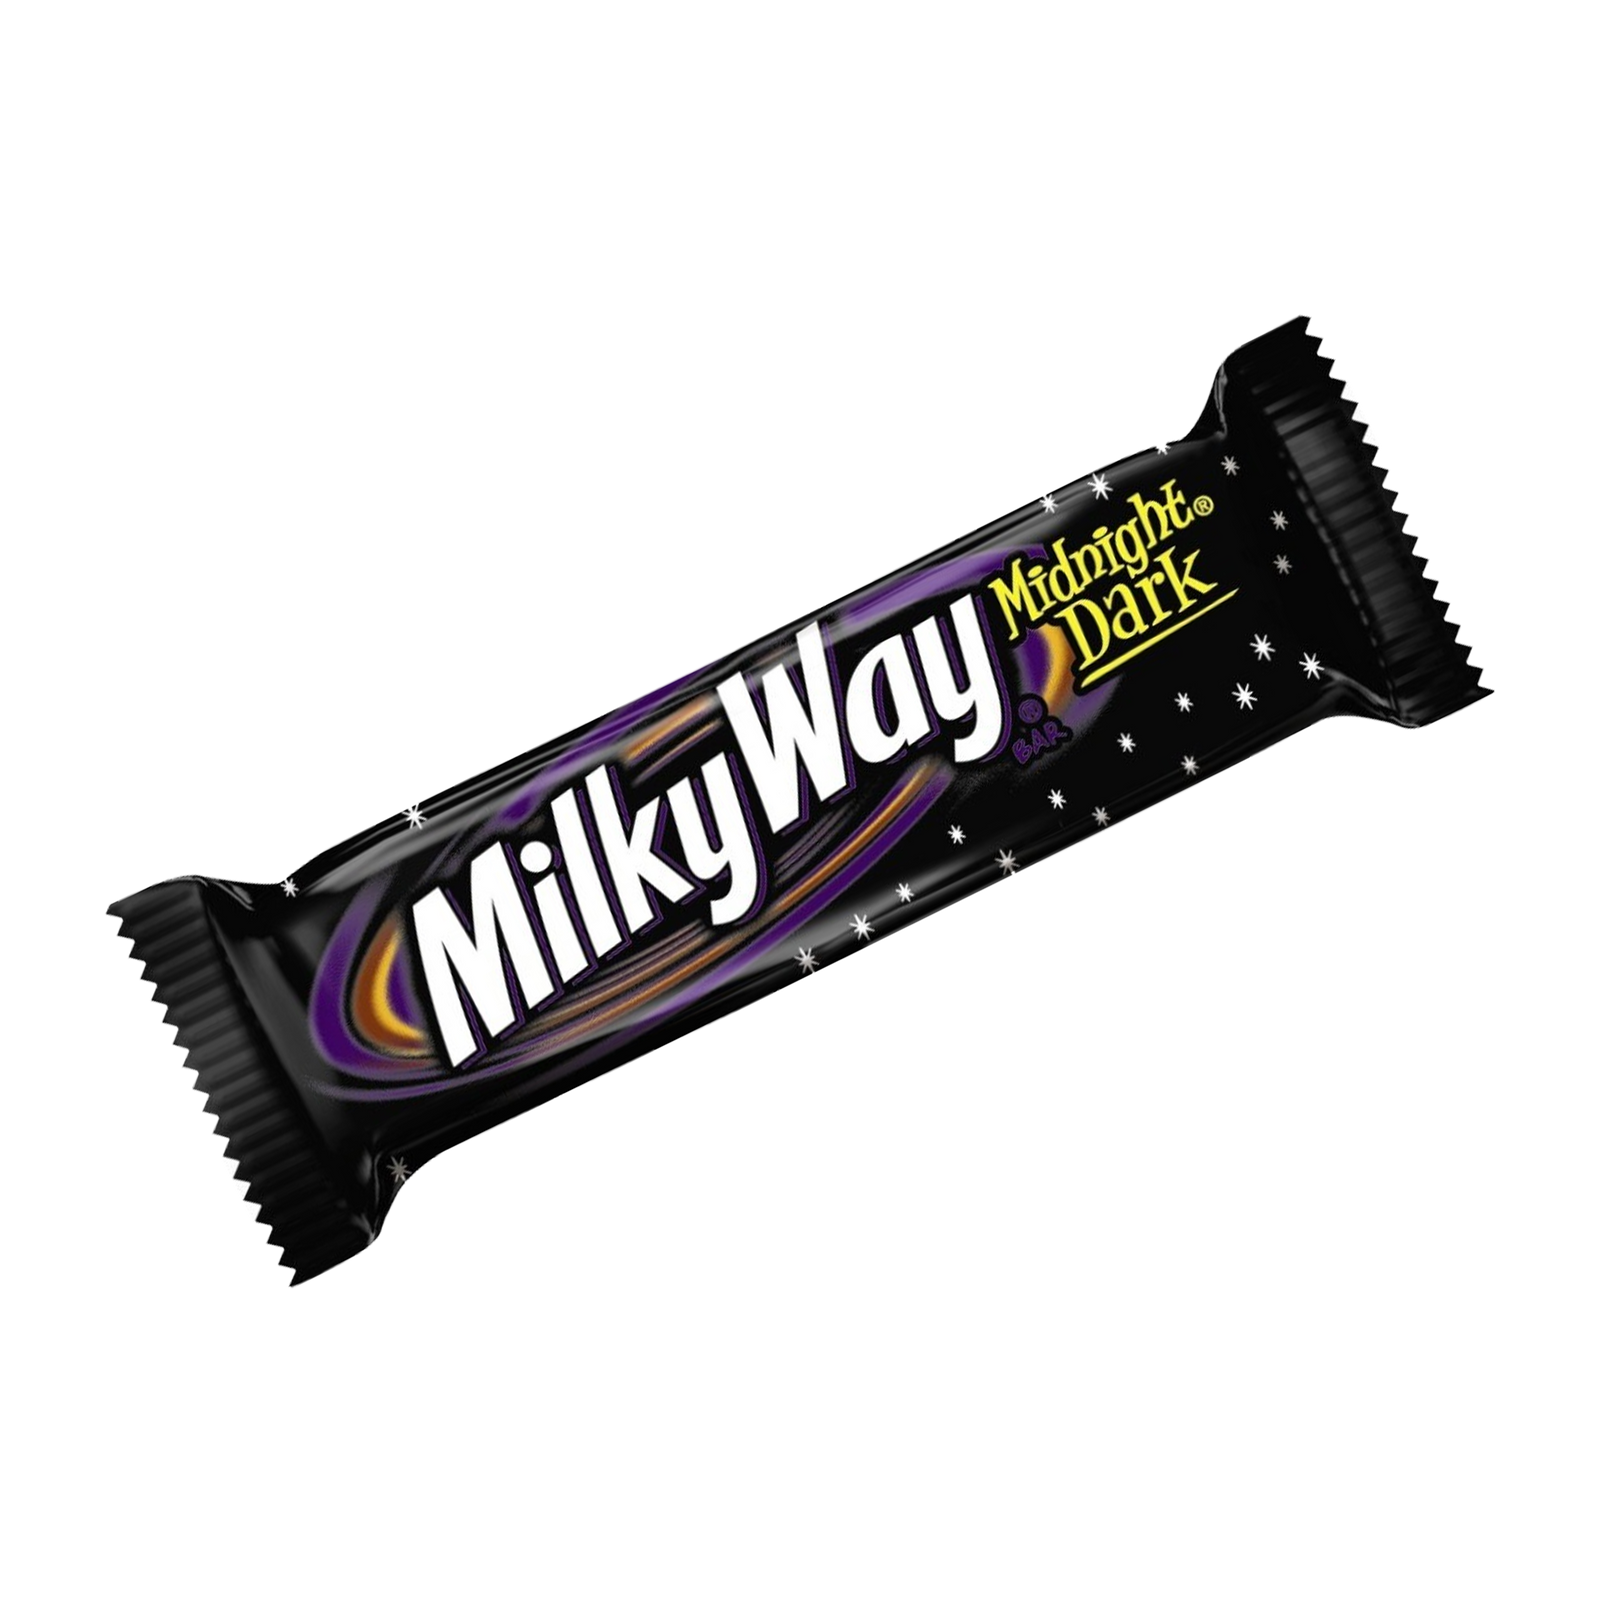 Milky Way Chocolate Bar PNG Images Transparent Background | PNG Play